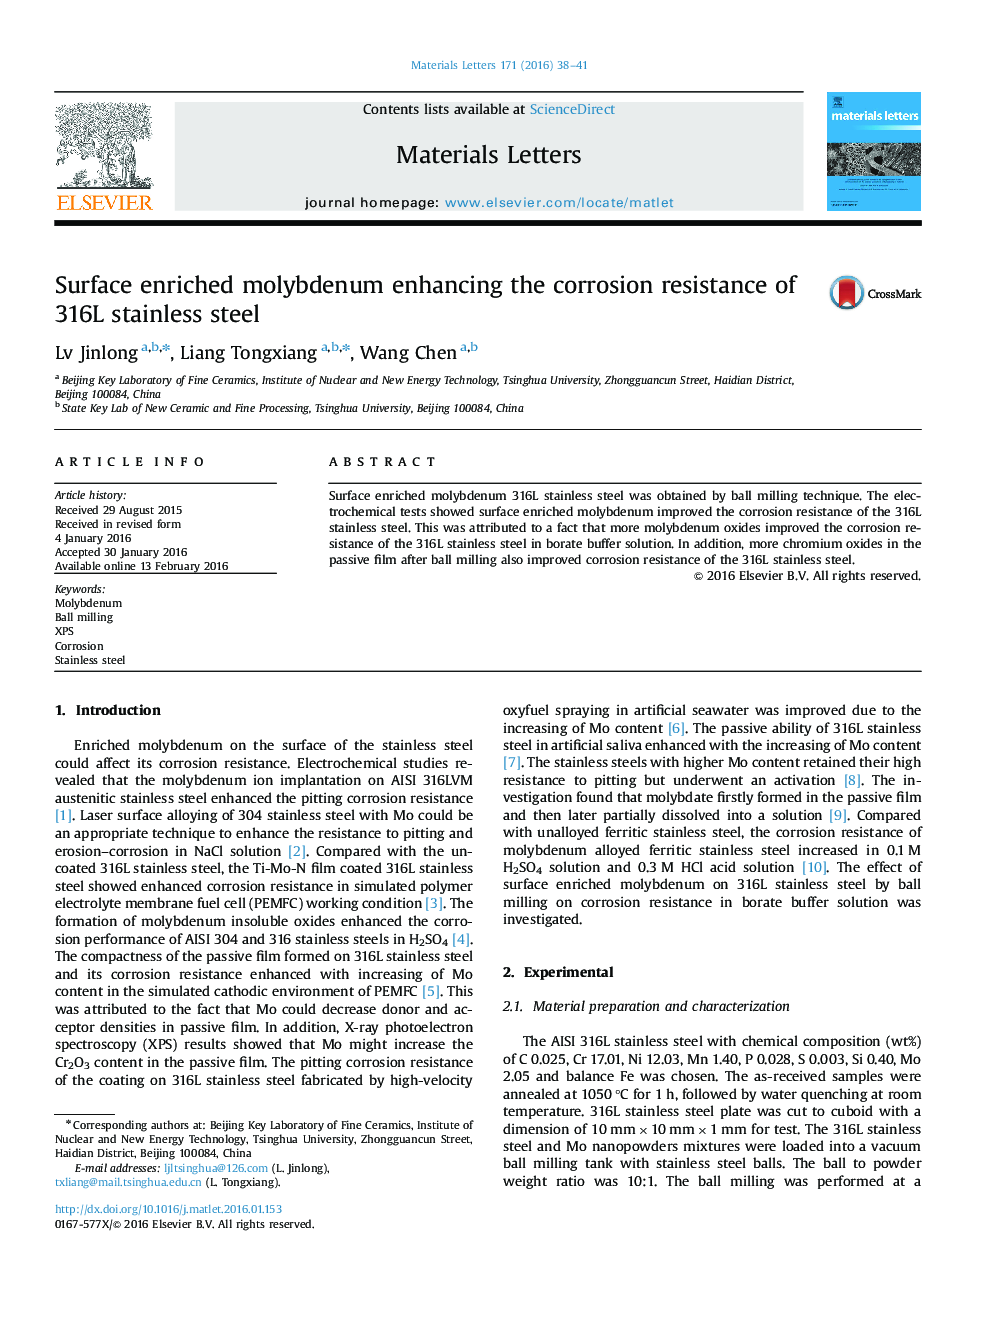 Surface enriched molybdenum enhancing the corrosion resistance of 316L stainless steel